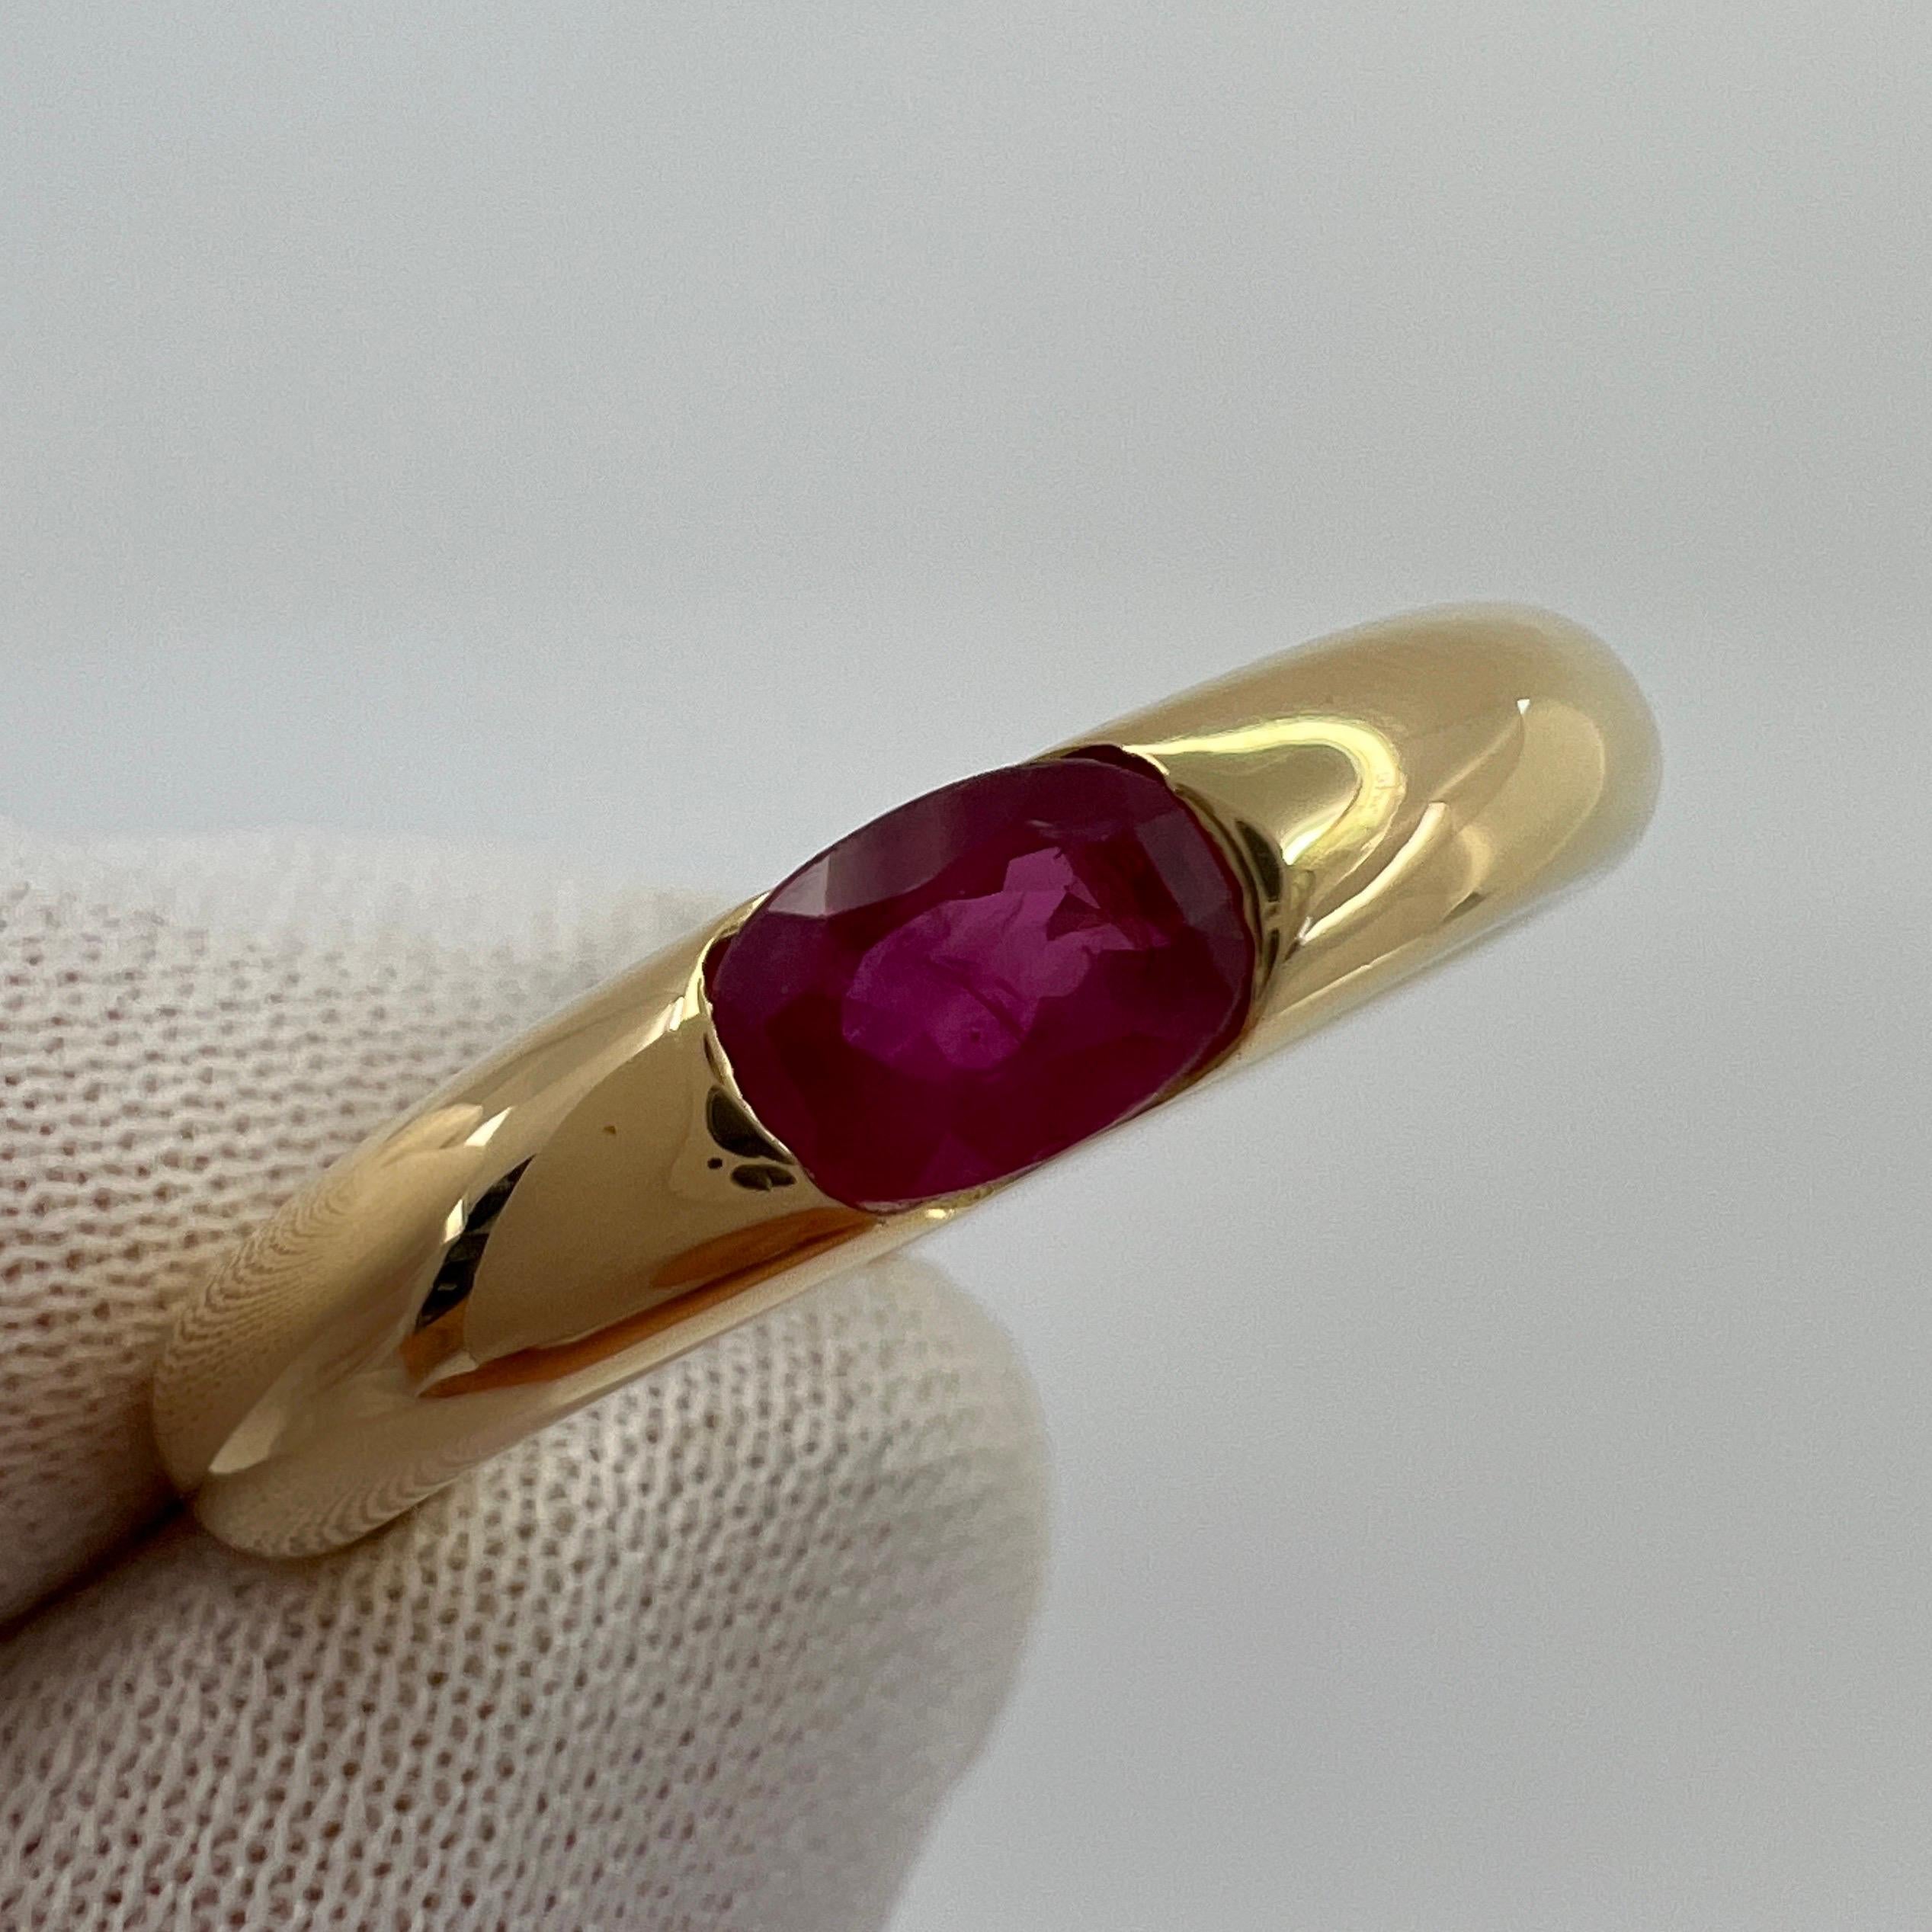 Vintage Cartier Deep Red Ruby Ellipse 18k Yellow Gold Oval Cut Solitaire Ring 2